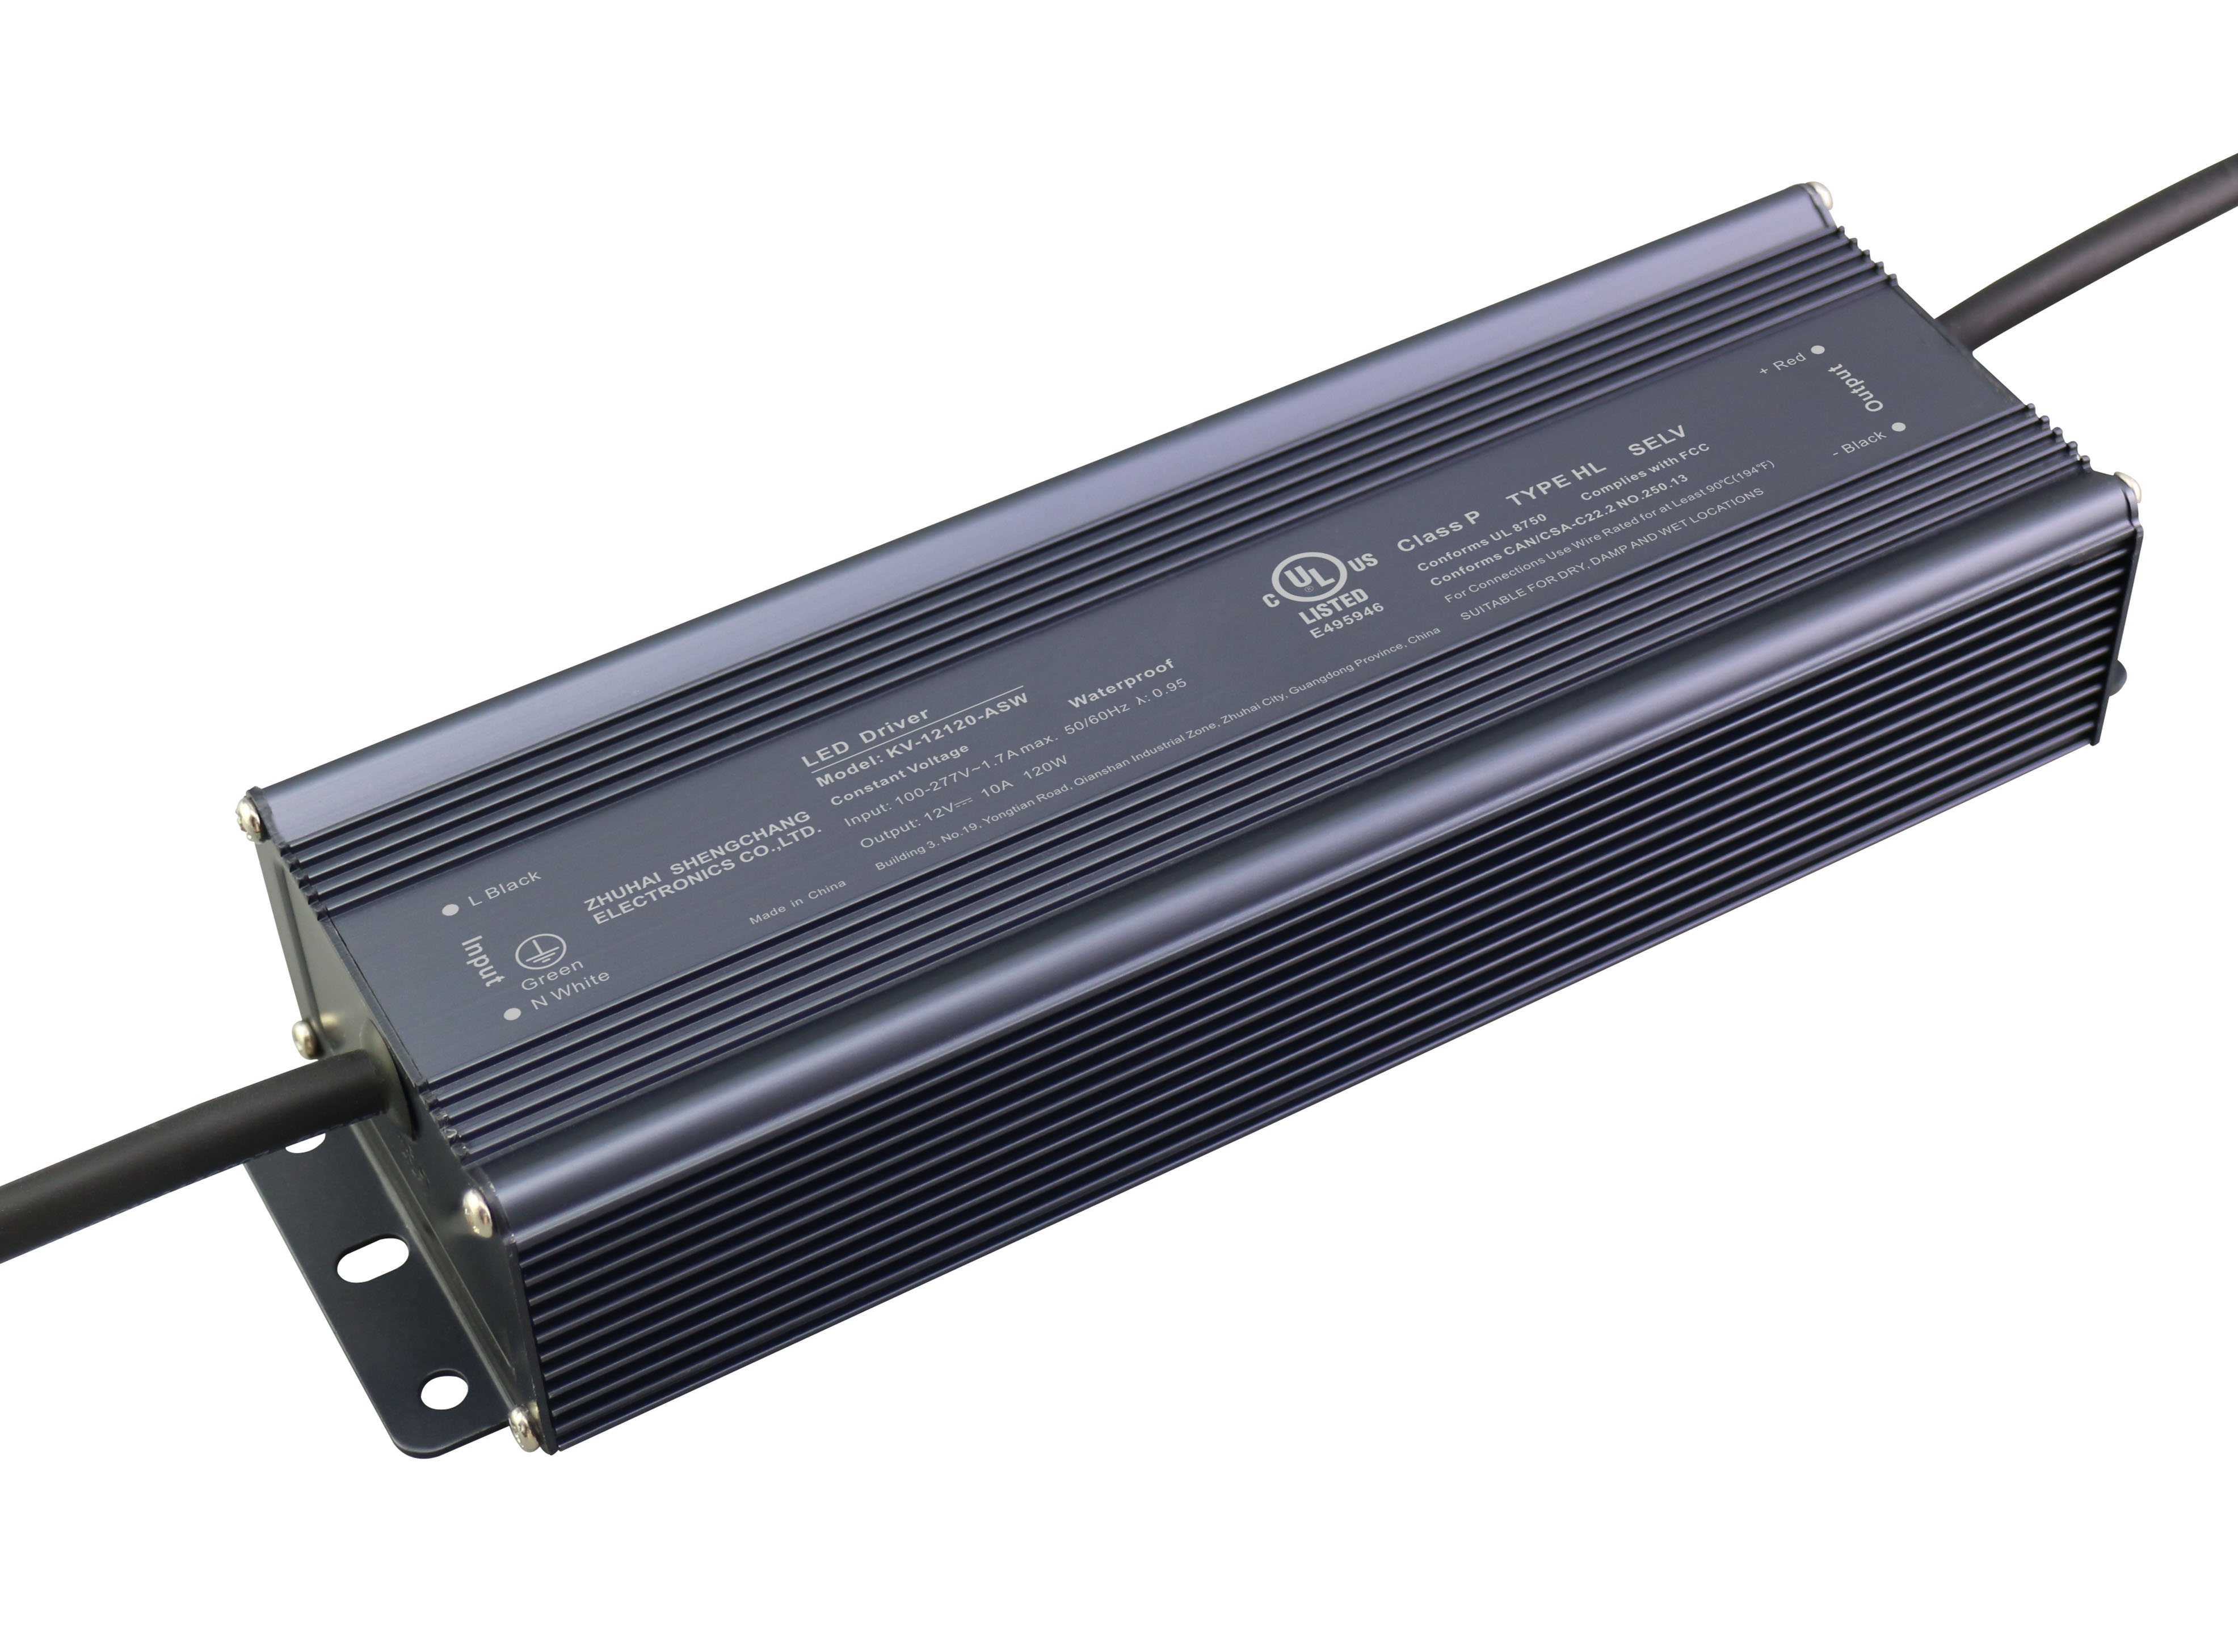 KV-ASW Series 120W Constant Voltage Non-Dimming LED Driver